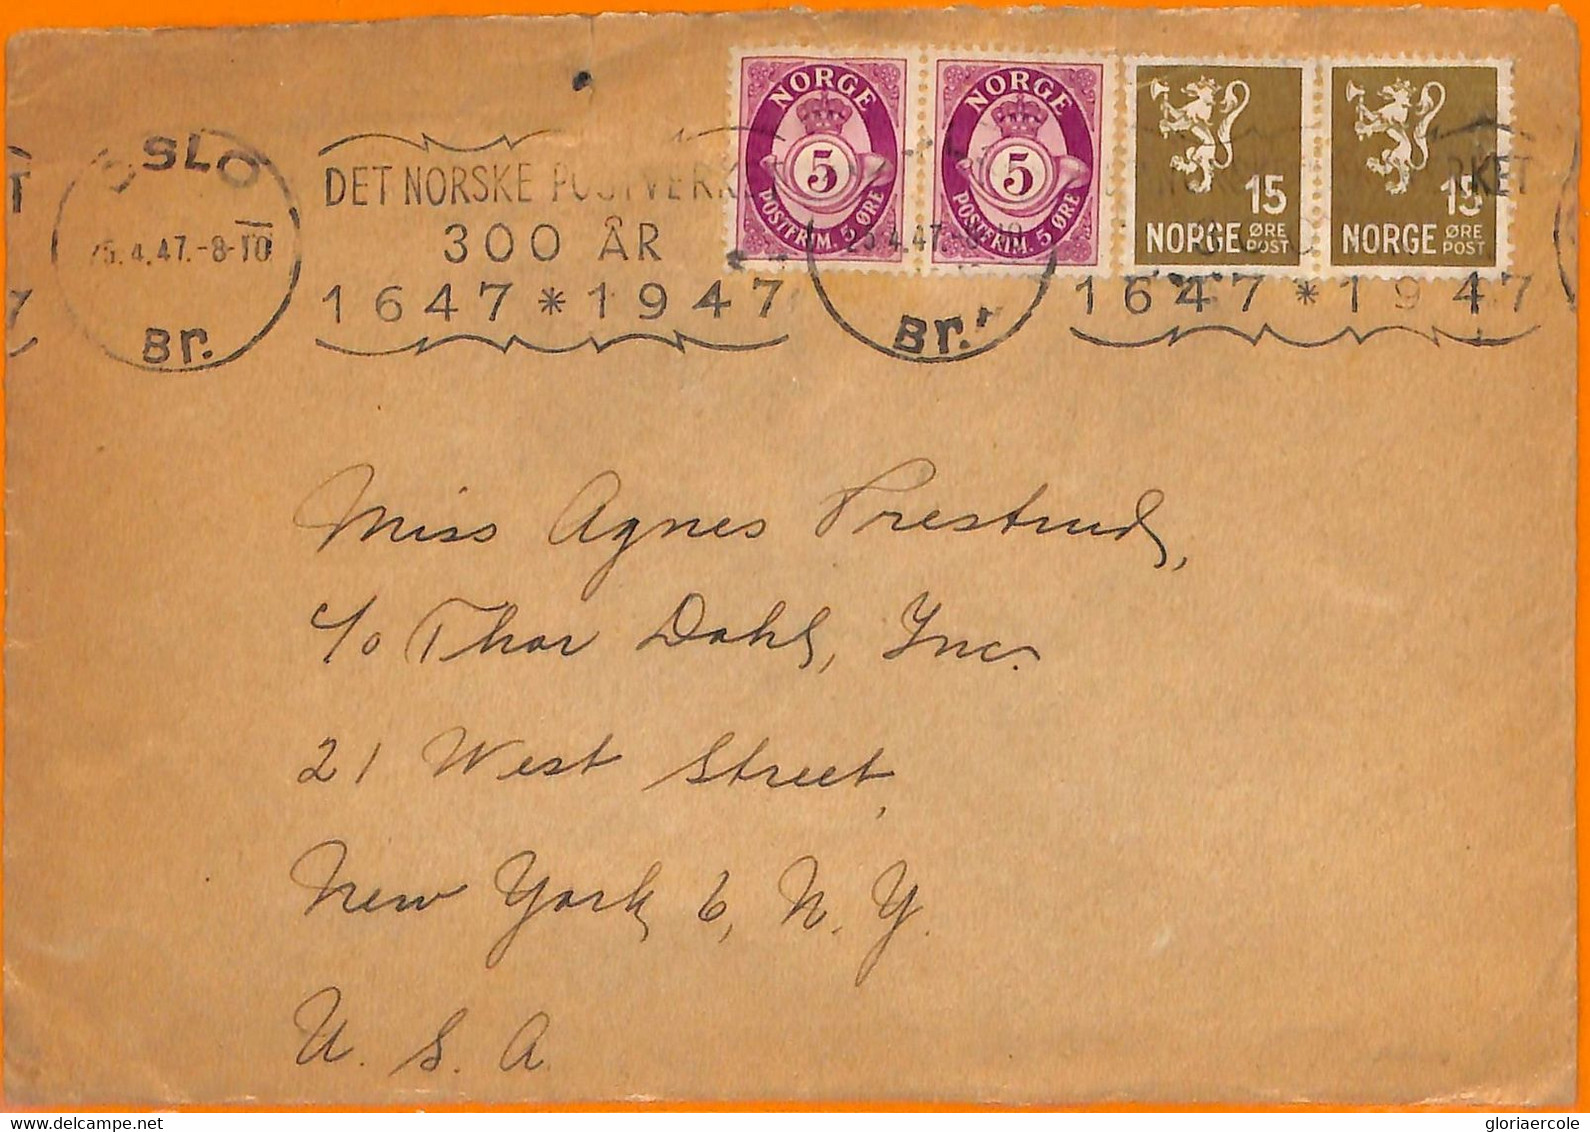 99410 - NORWAY - Postal History -  Cover To The USA 1947 - Briefe U. Dokumente